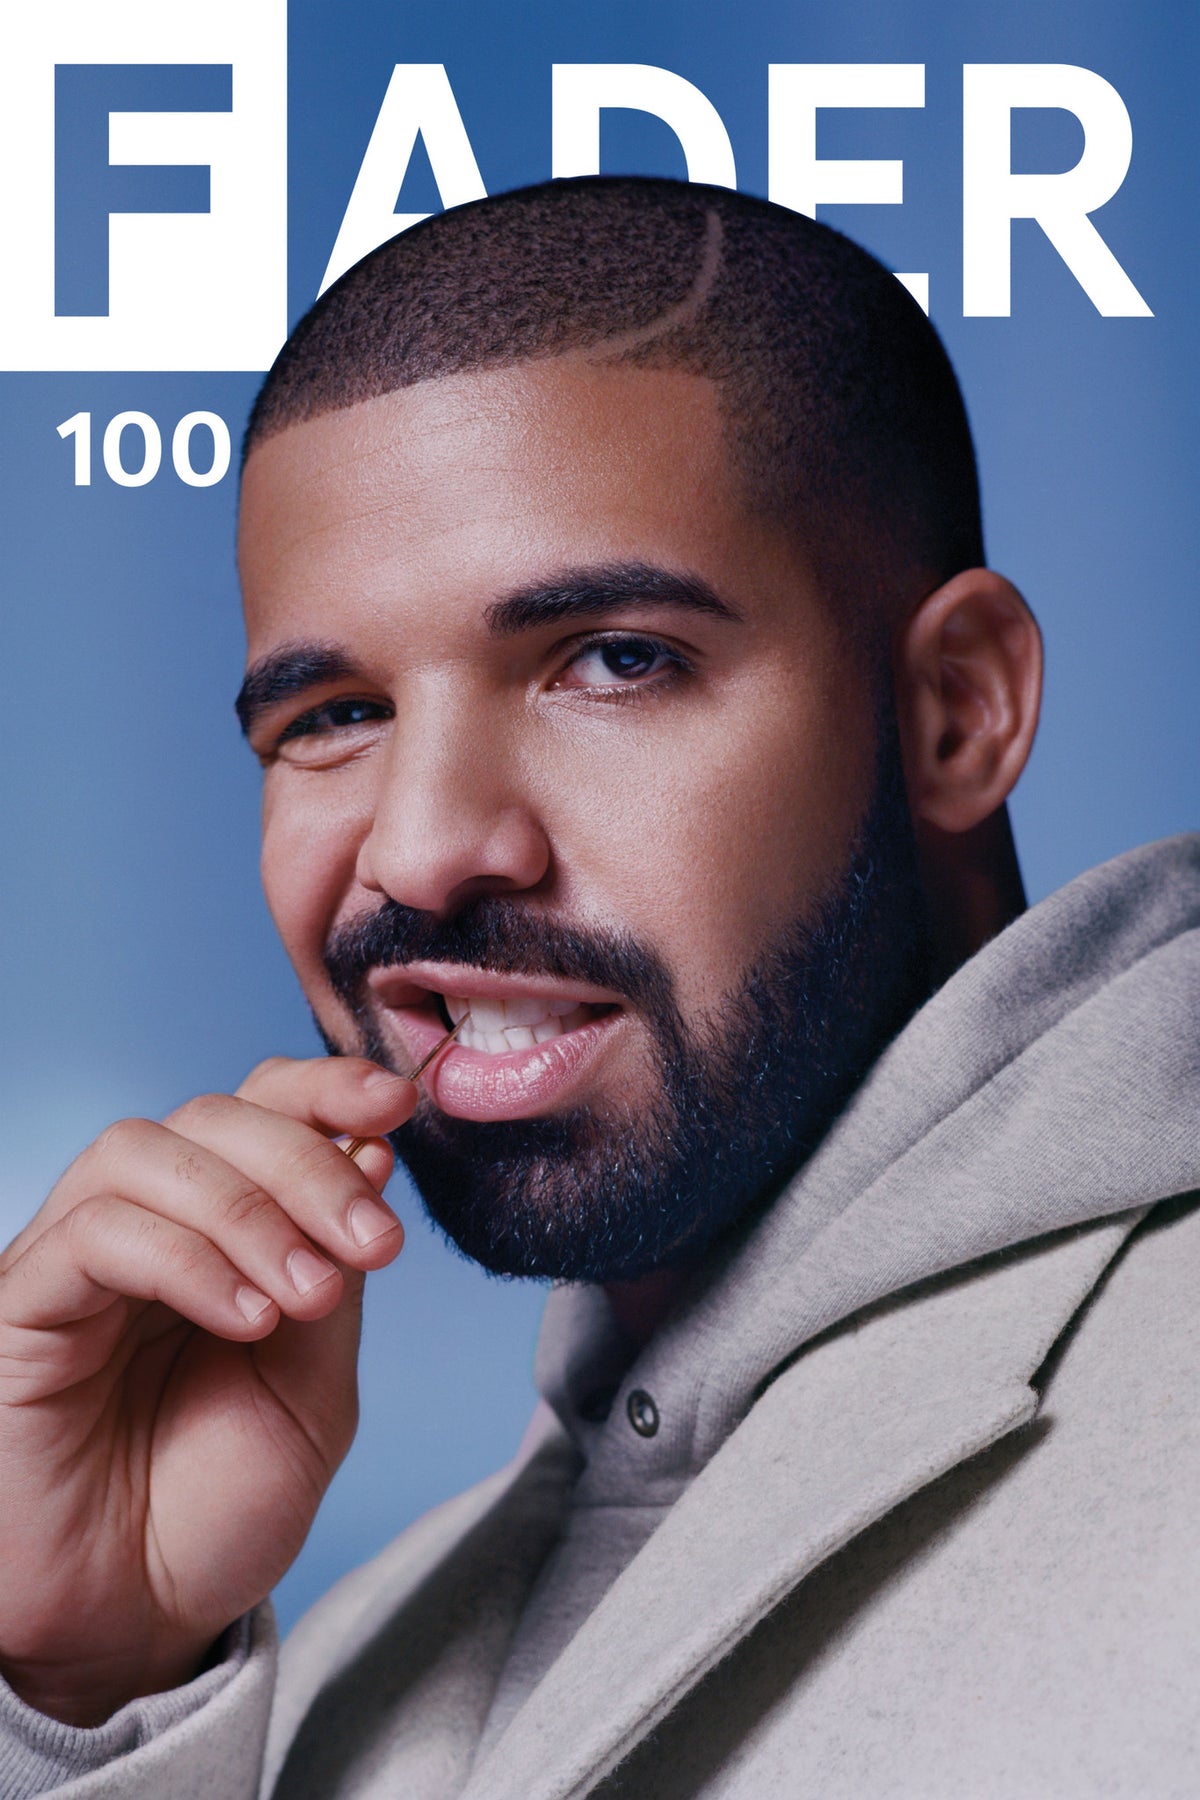 Begrip Twinkelen dosis Drake / The FADER Issue 100 Cover 20" x 30" Poster